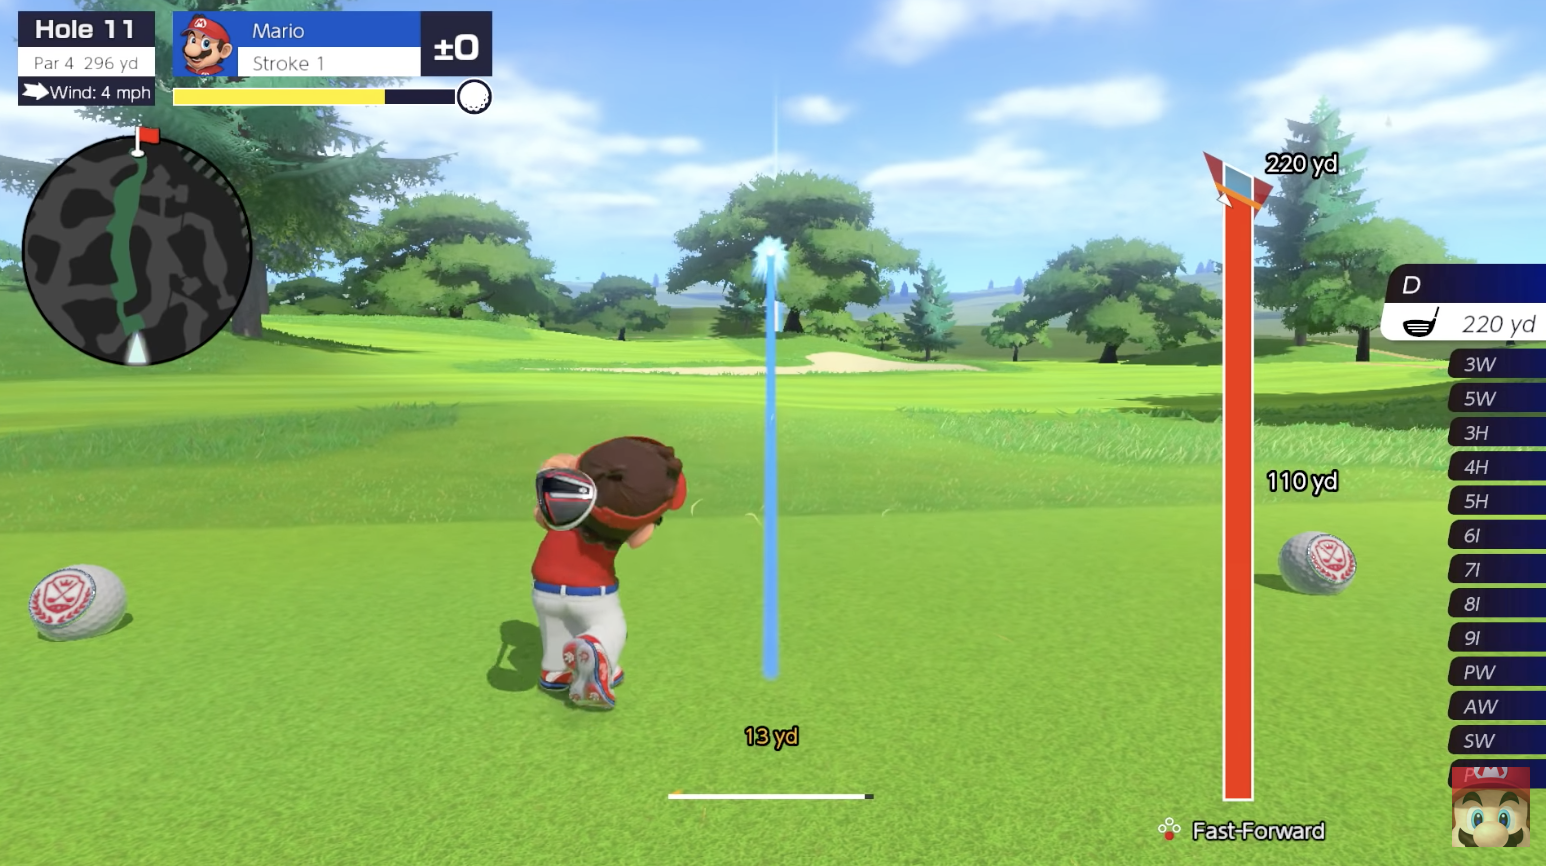 Mario Golf: Super Rush Overview Trailer (5 Minutes of Footage)